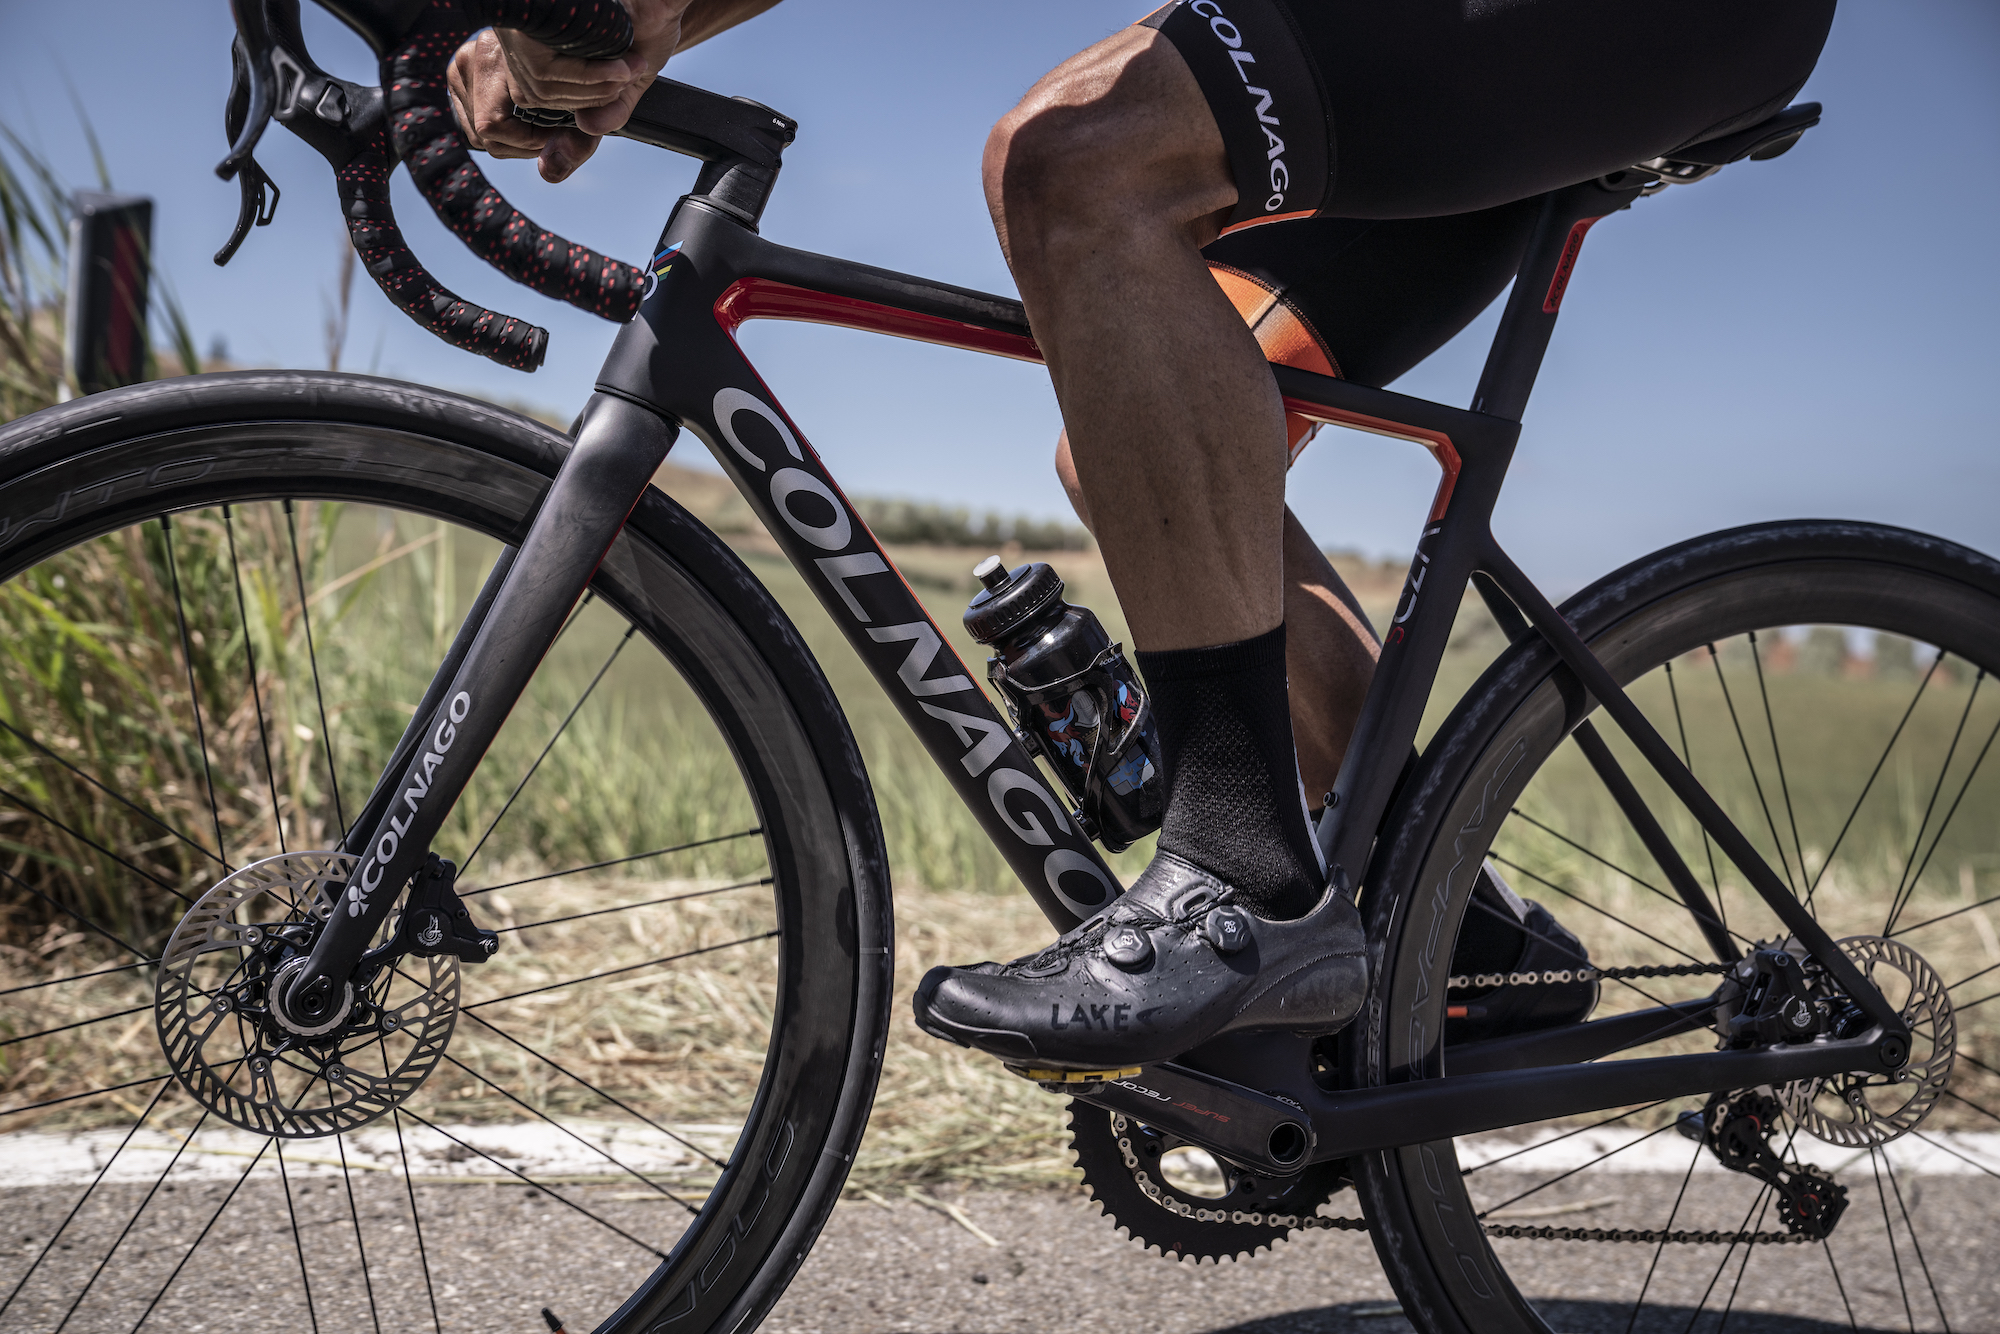 New Colnago V3Rs launched - lighter, stiffer and more compliant | road.cc